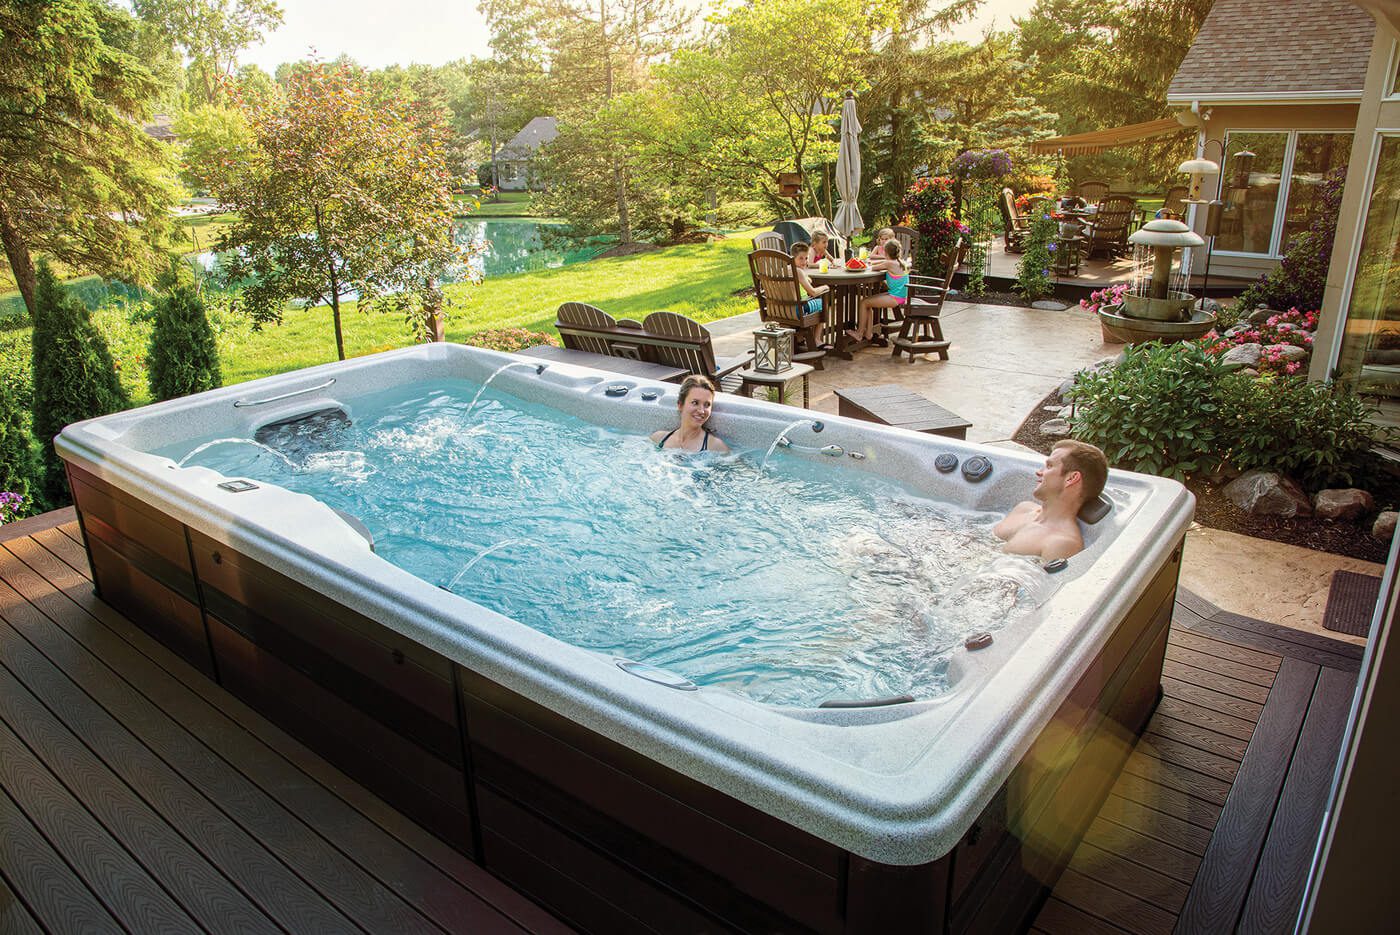 People relaxing in a swim spa